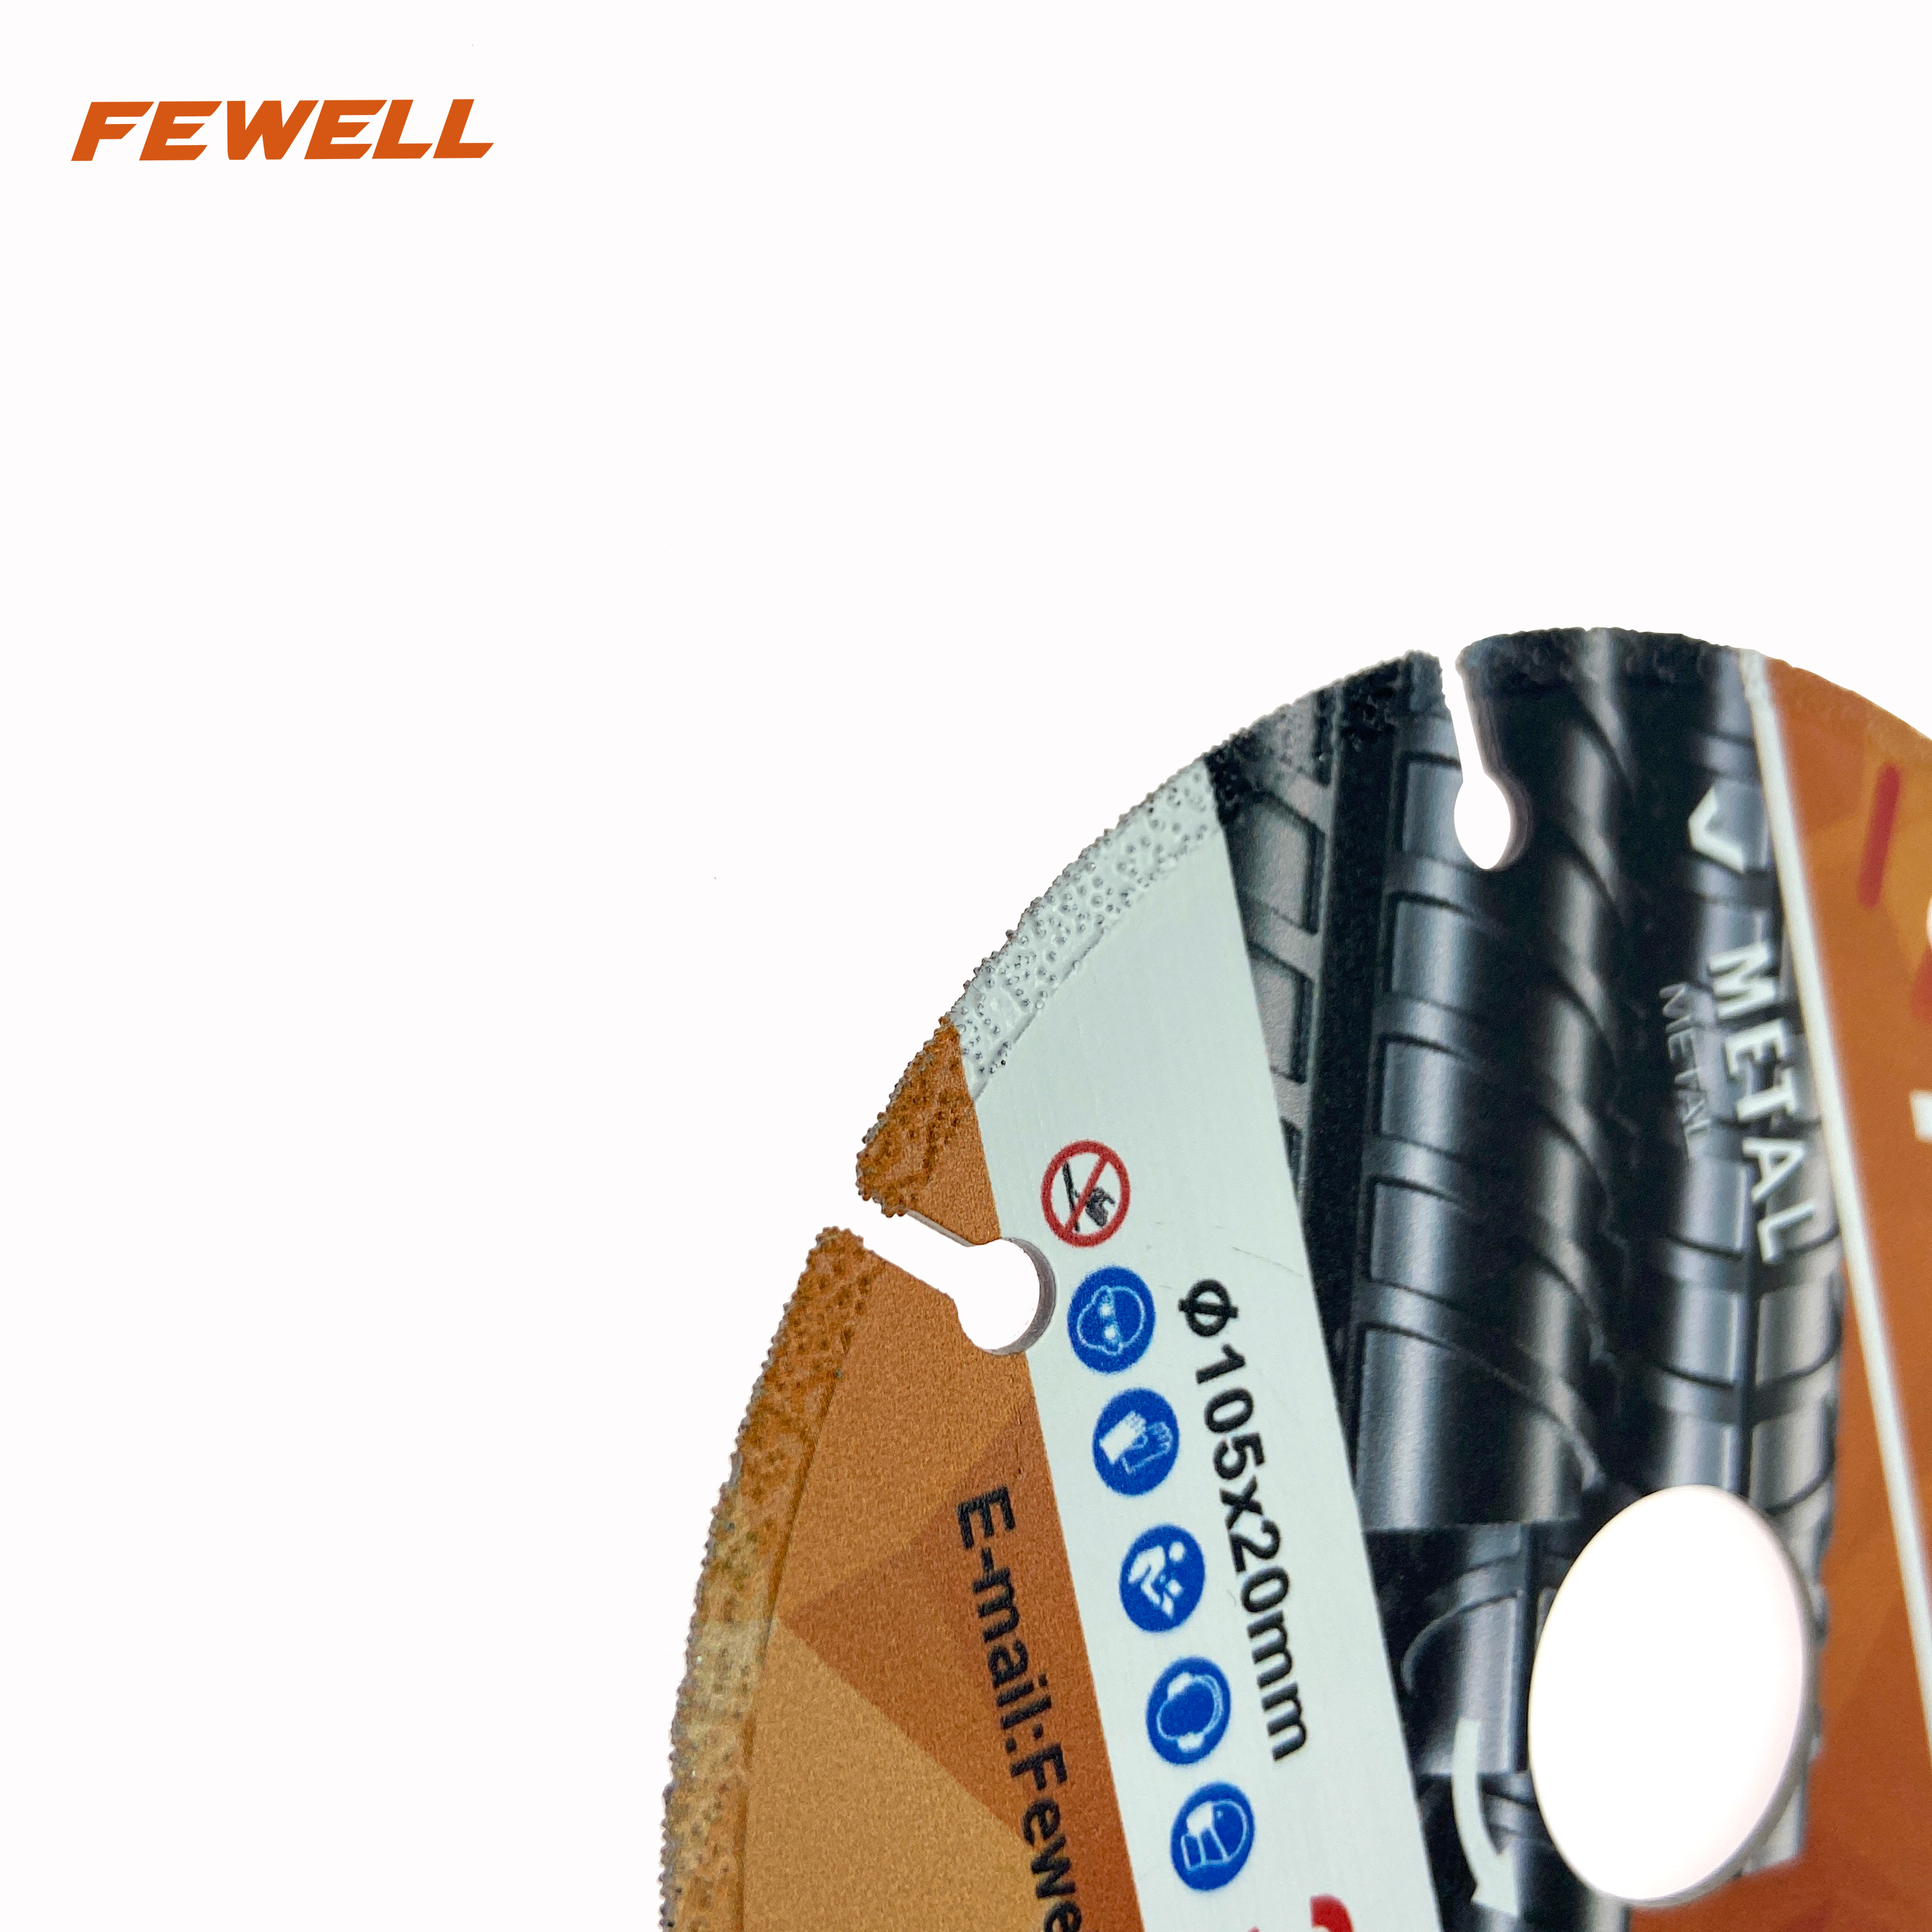 High quality Vacuum brazed segmented 4/125/14inch 105/125/350mm diamond saw blade for cutting metal stainless steel